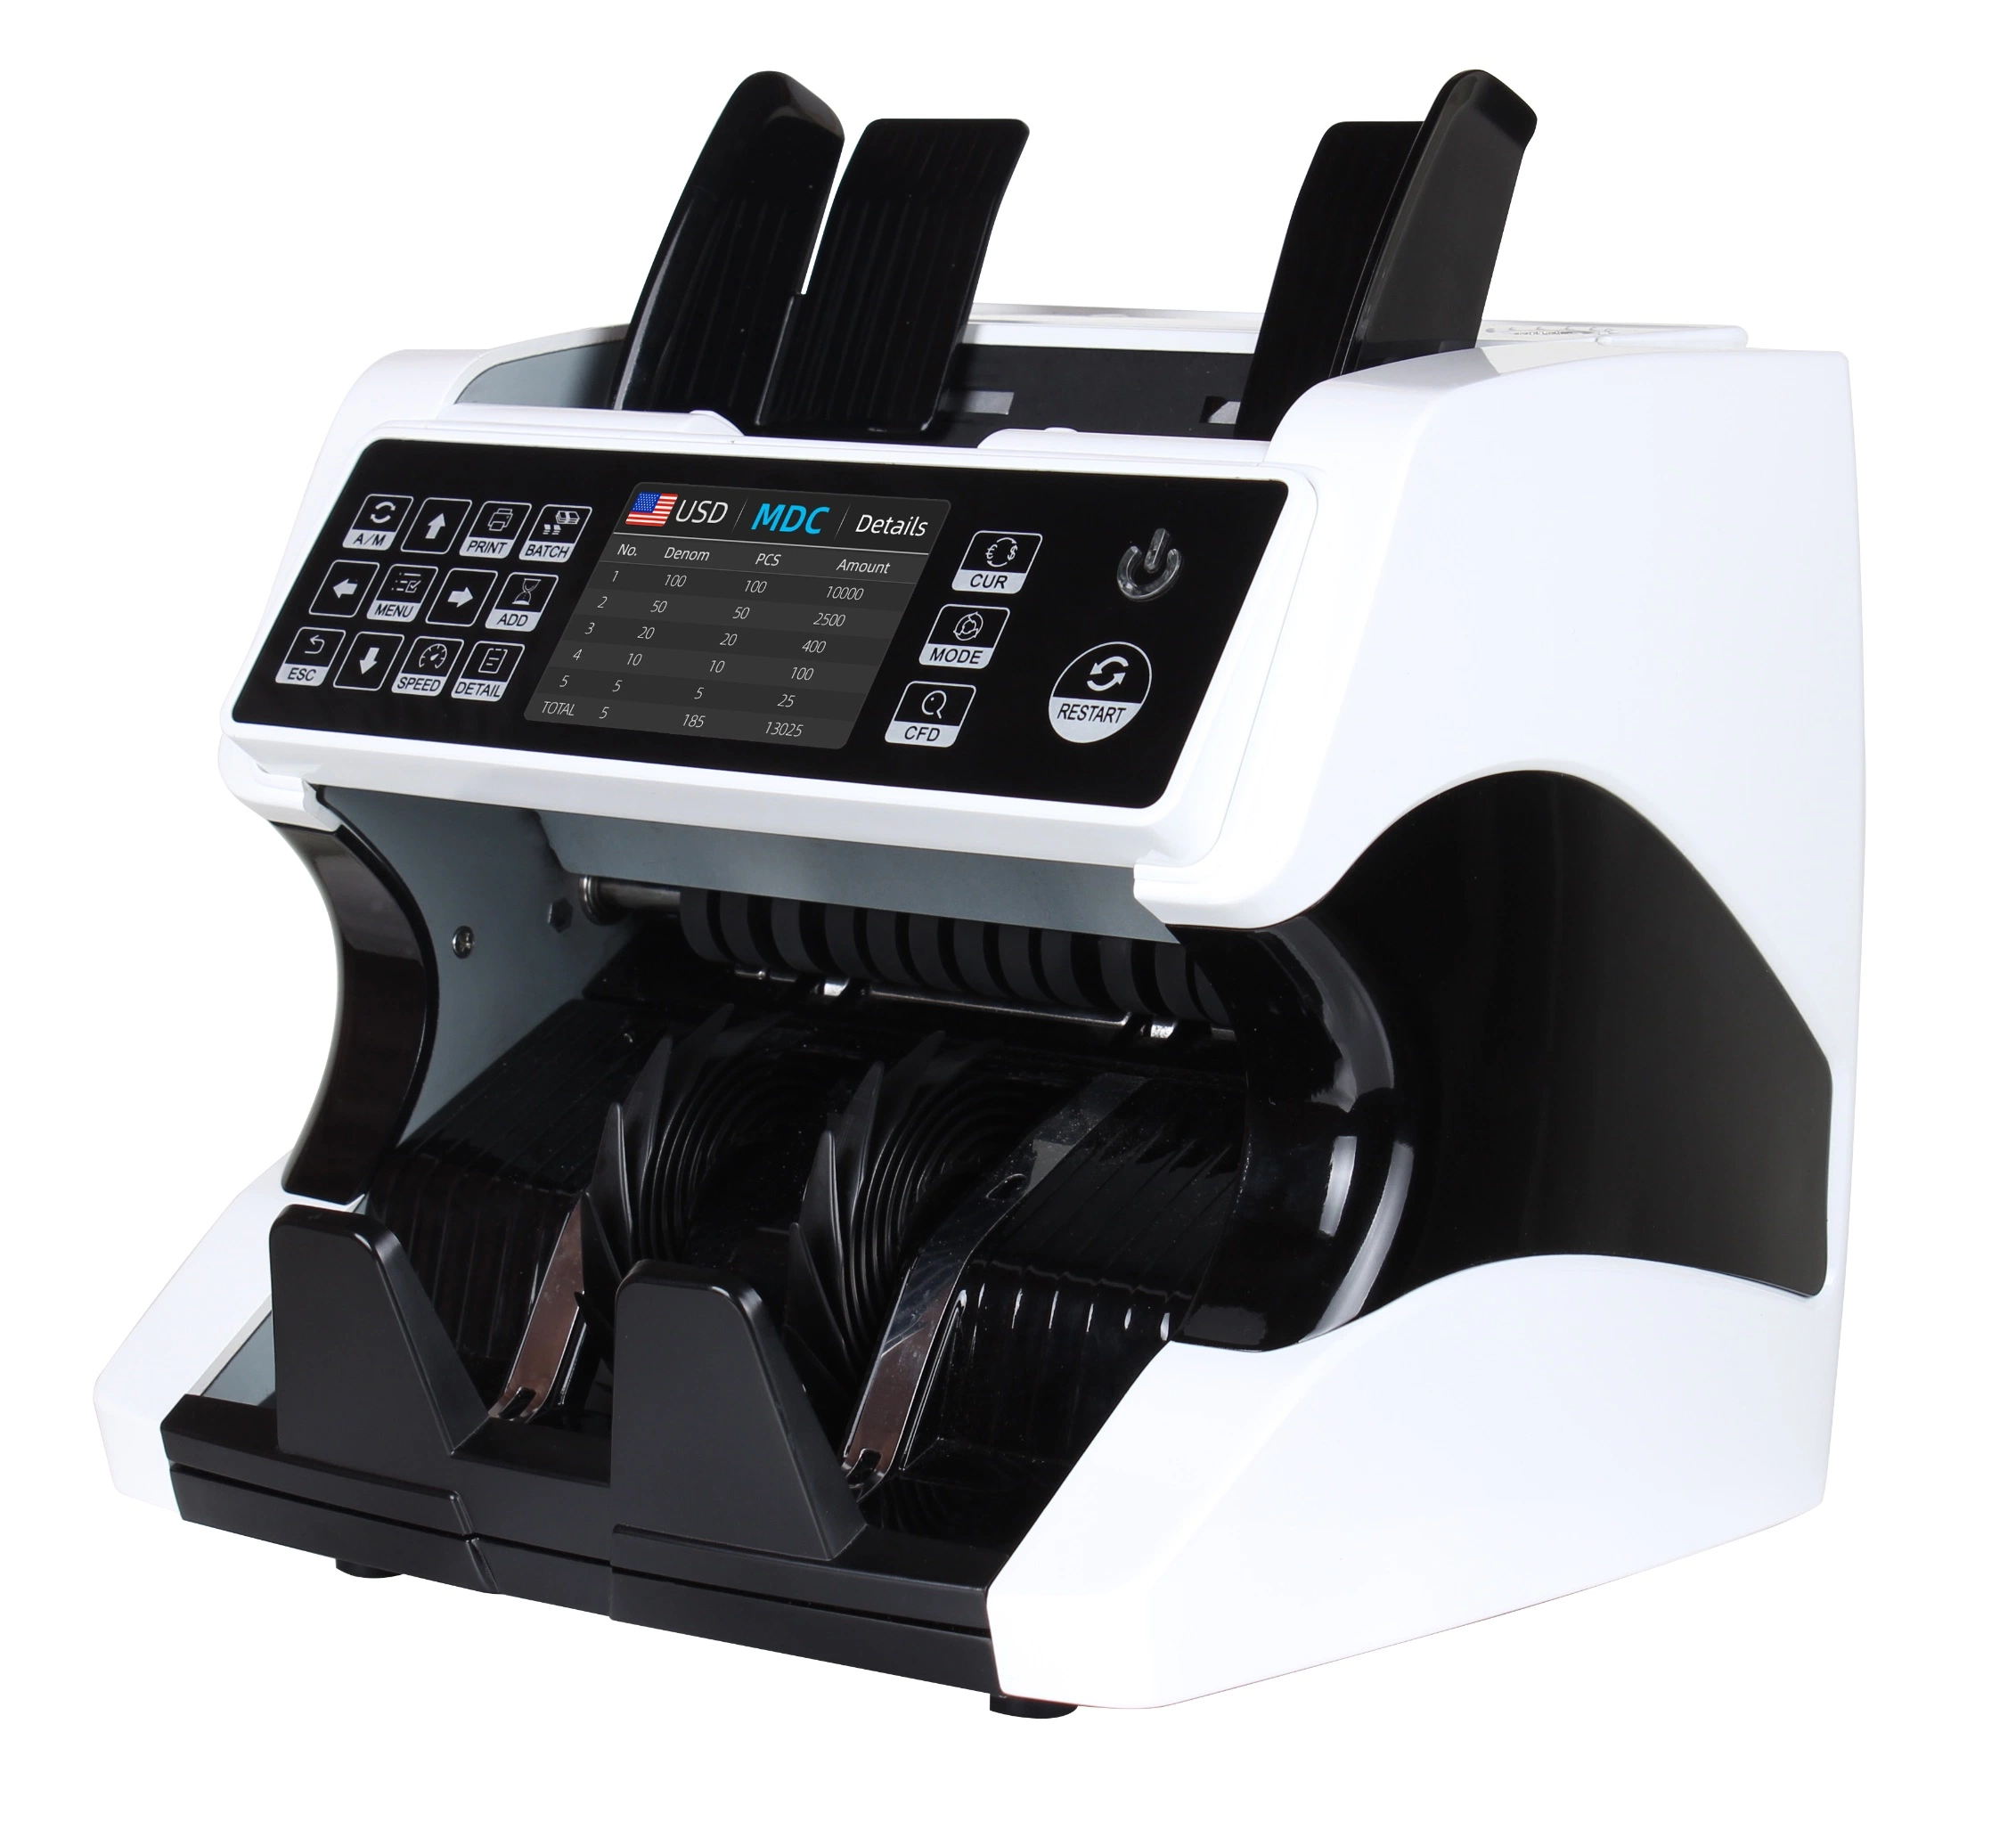 INR USD GBP Euro MXN JPY Rur IQD XOF Multi Currency CIS Value Counting and Sorting Machine, Money Counter, Bill Sorter